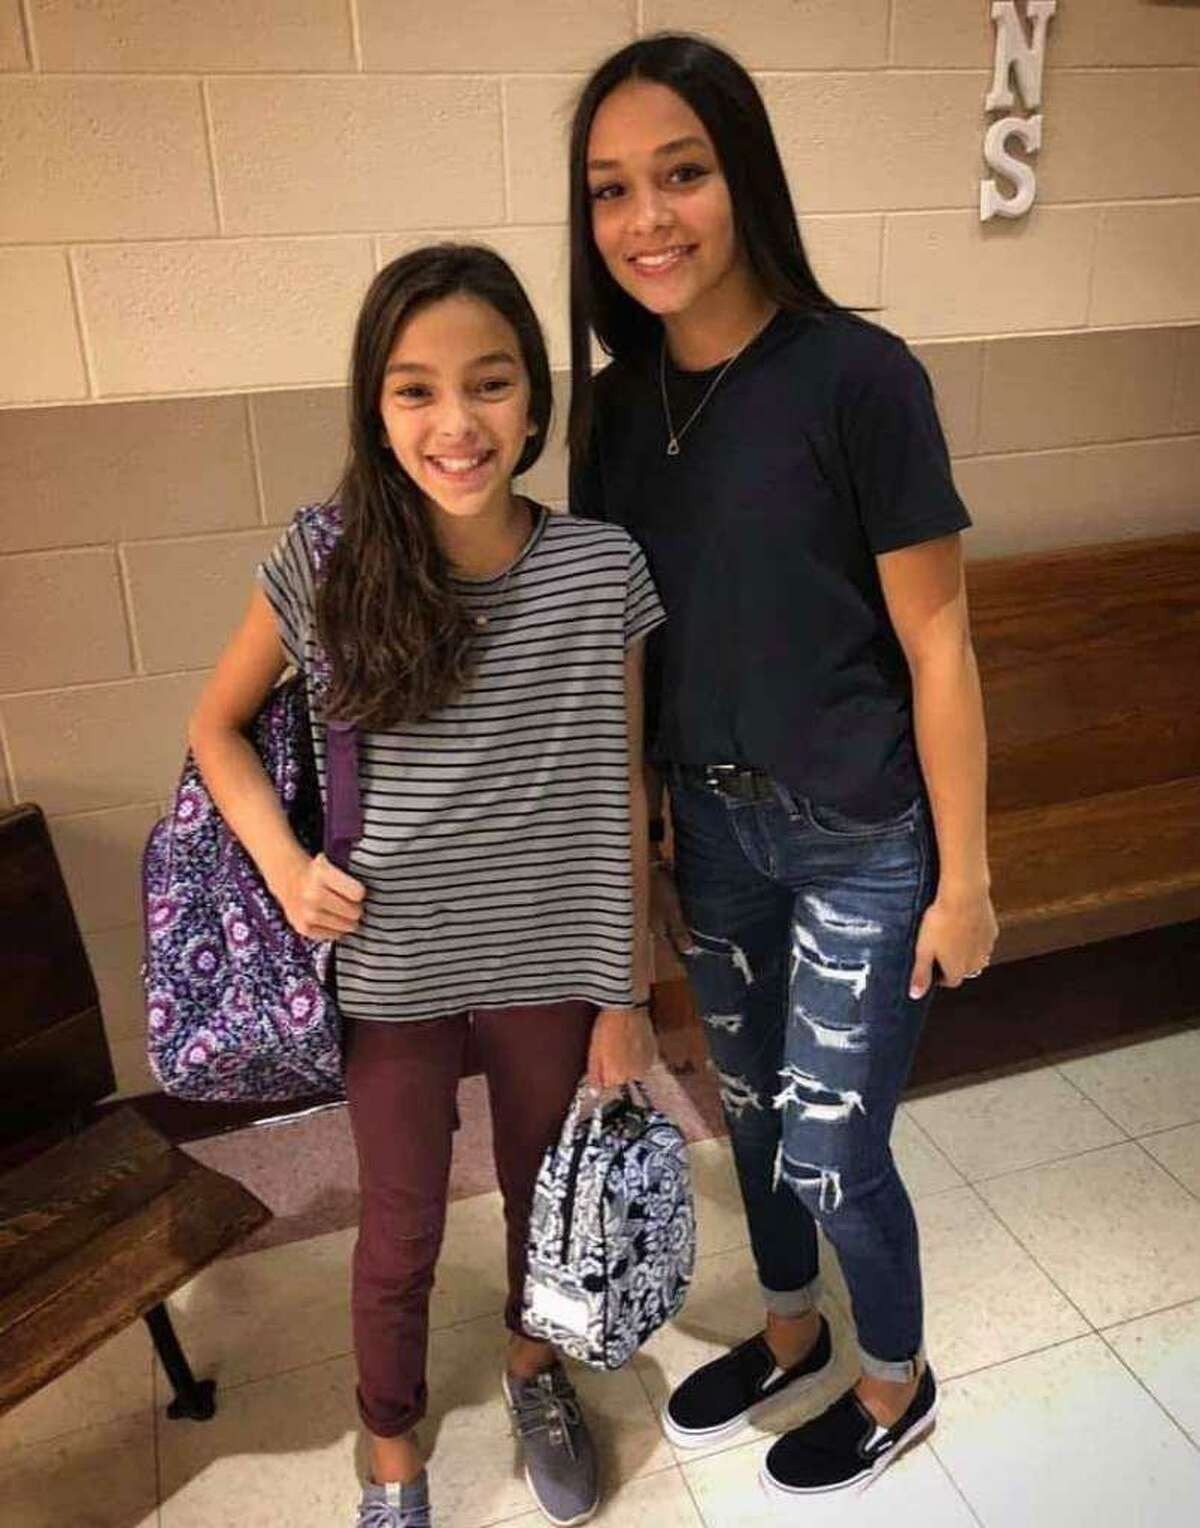 London Sophia Bribiescas, 10, is shown with her sister, Alexa Denice Montez, 16. The sisters were found shot dead with their mother, Nichol Olsen, at a home in the Anaqua Springs Ranch community near Leon Springs in January 2019. Both children’s deaths were ruled homicides, while Olsen’s death was ruled a suicide. But three-and-a-half years later, the families are still waiting for answers from the Bexar County Sheriff’s Office.